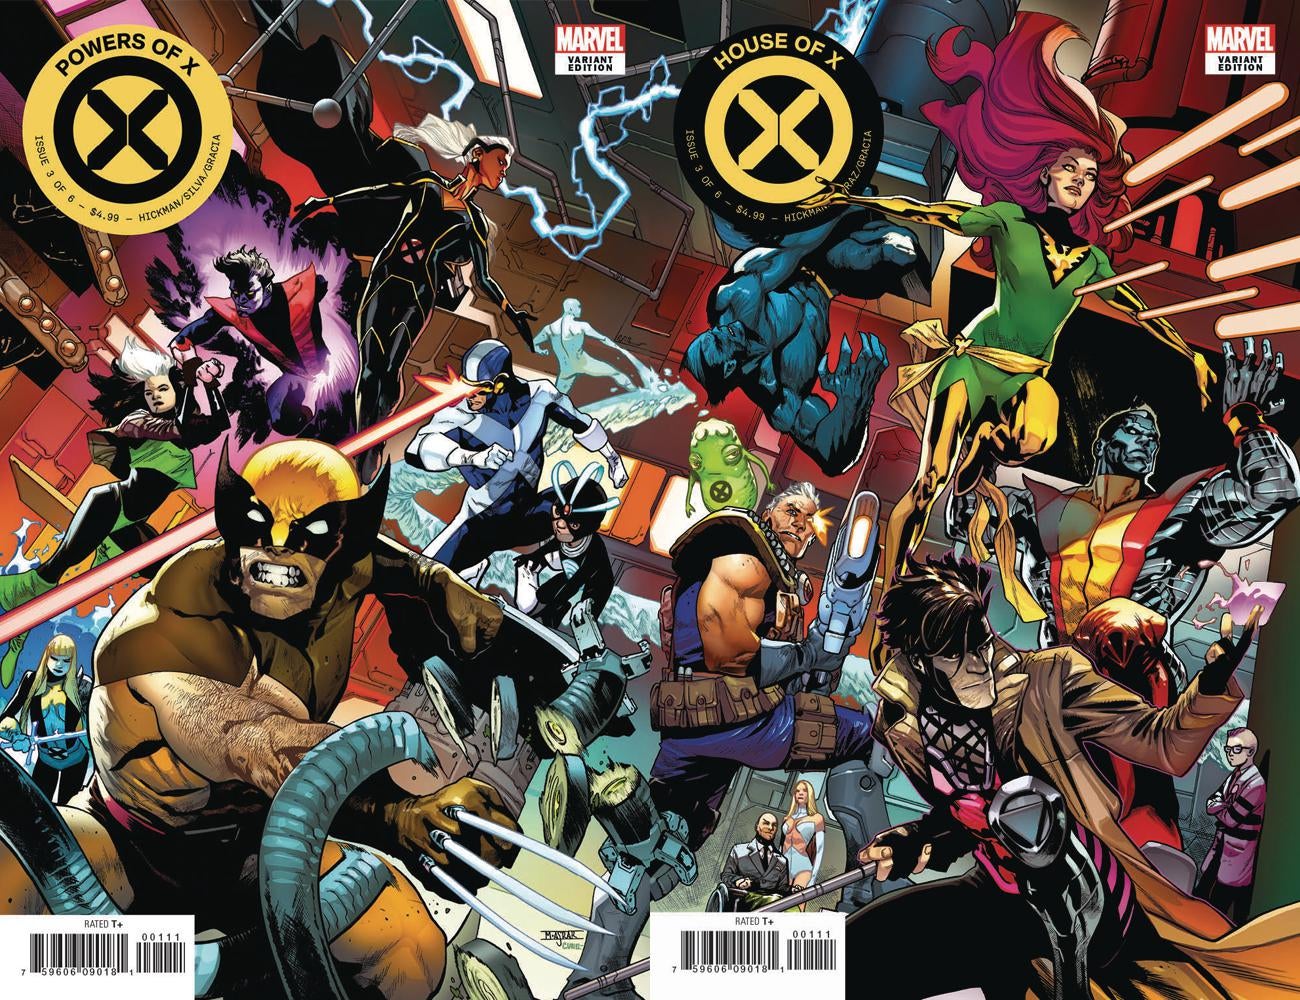 Powers of X #3 Review